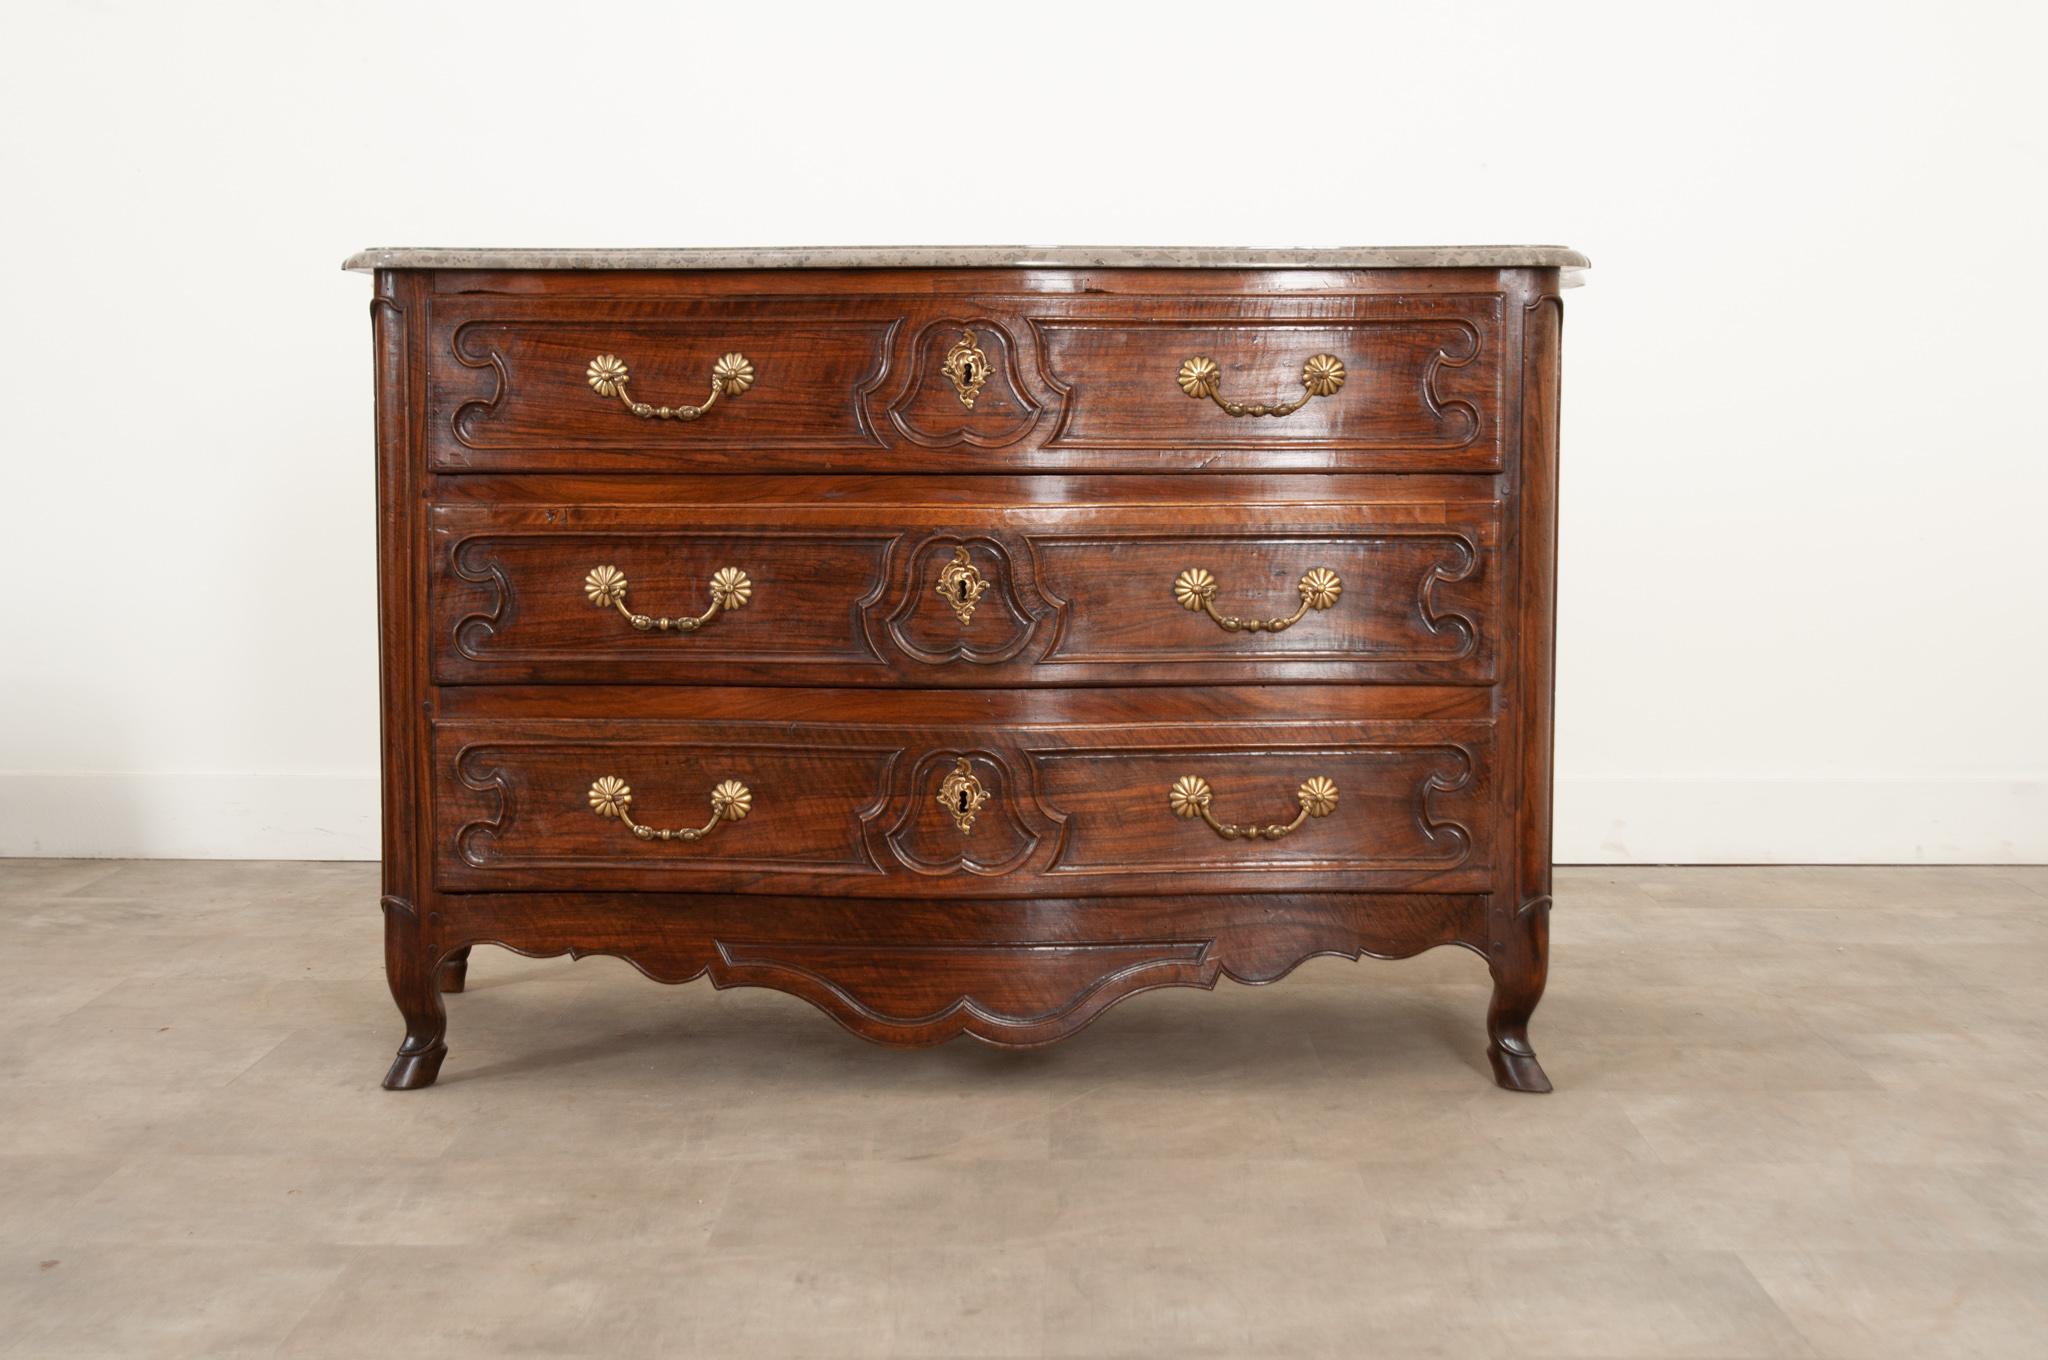 This fantastic Parisian solid rosewood and walnut commode was crafted in 18th century France circa 1740.  In great antique condition- the original marble top with a modeled edge is shaped according to the body of the piece. The rosewood and walnut